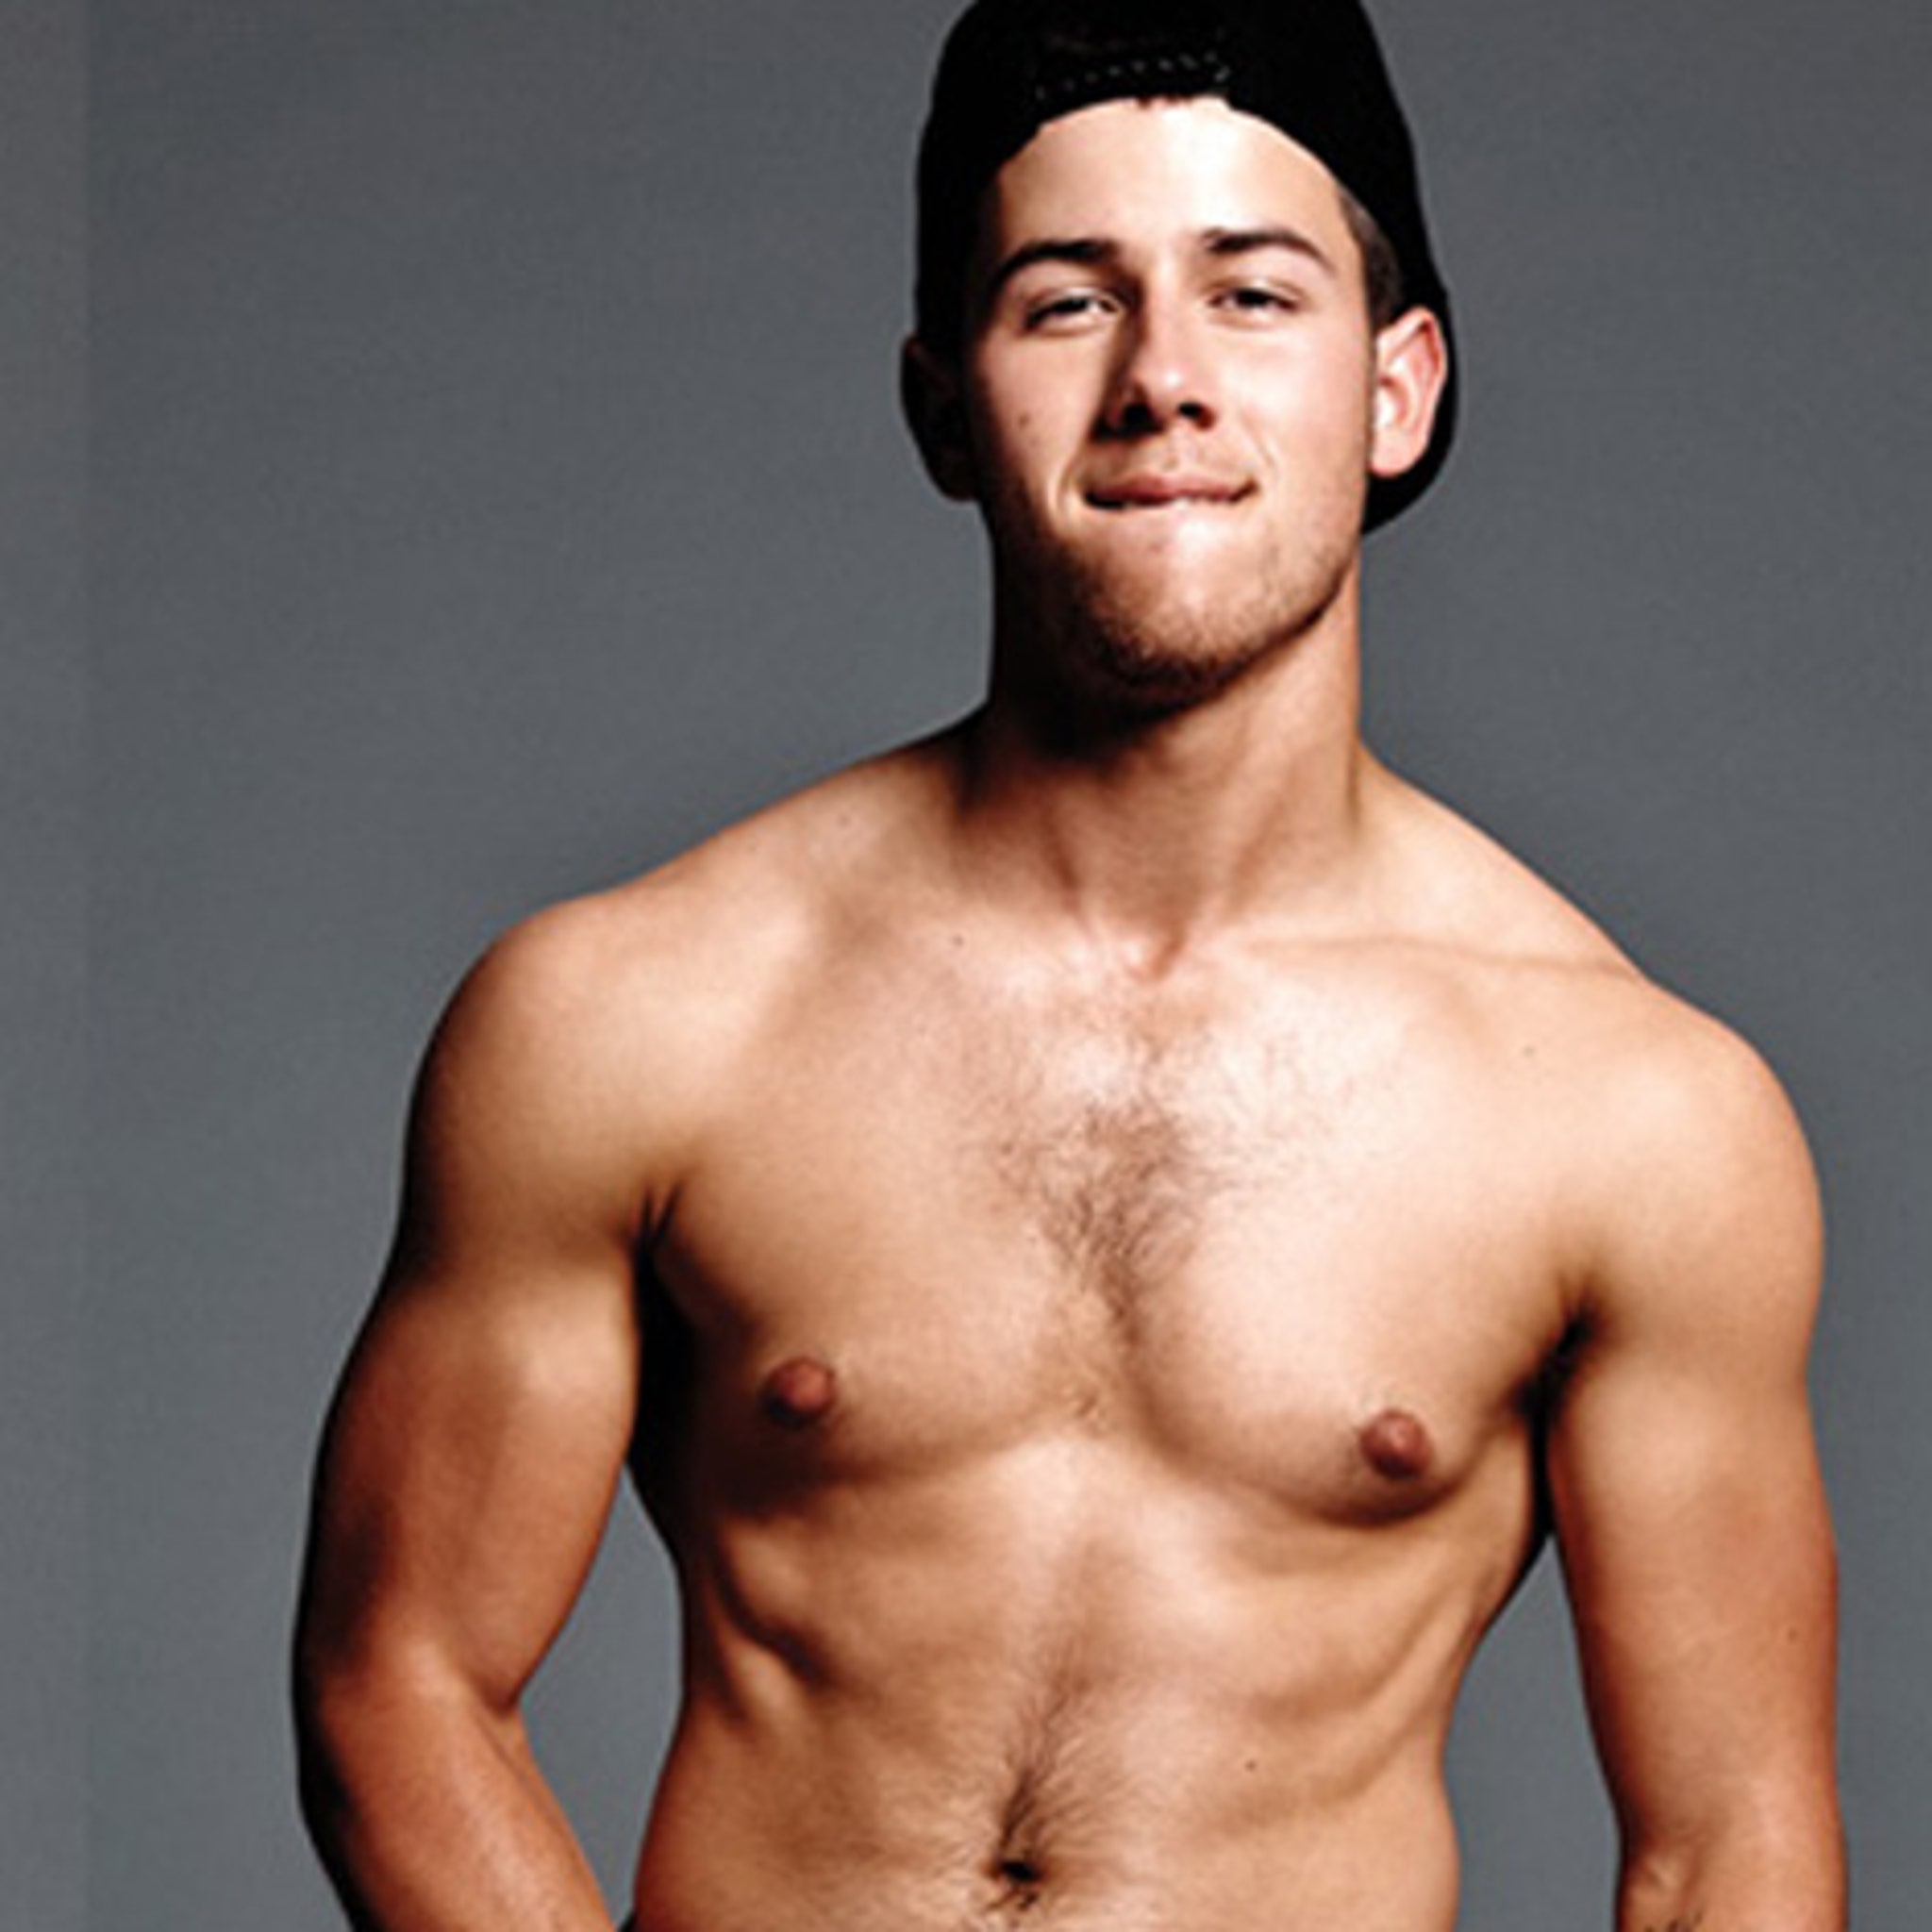 Nick Jonas Channels Marky Mark, Wears Tight Calvin Kleins and Grabs Crotch!